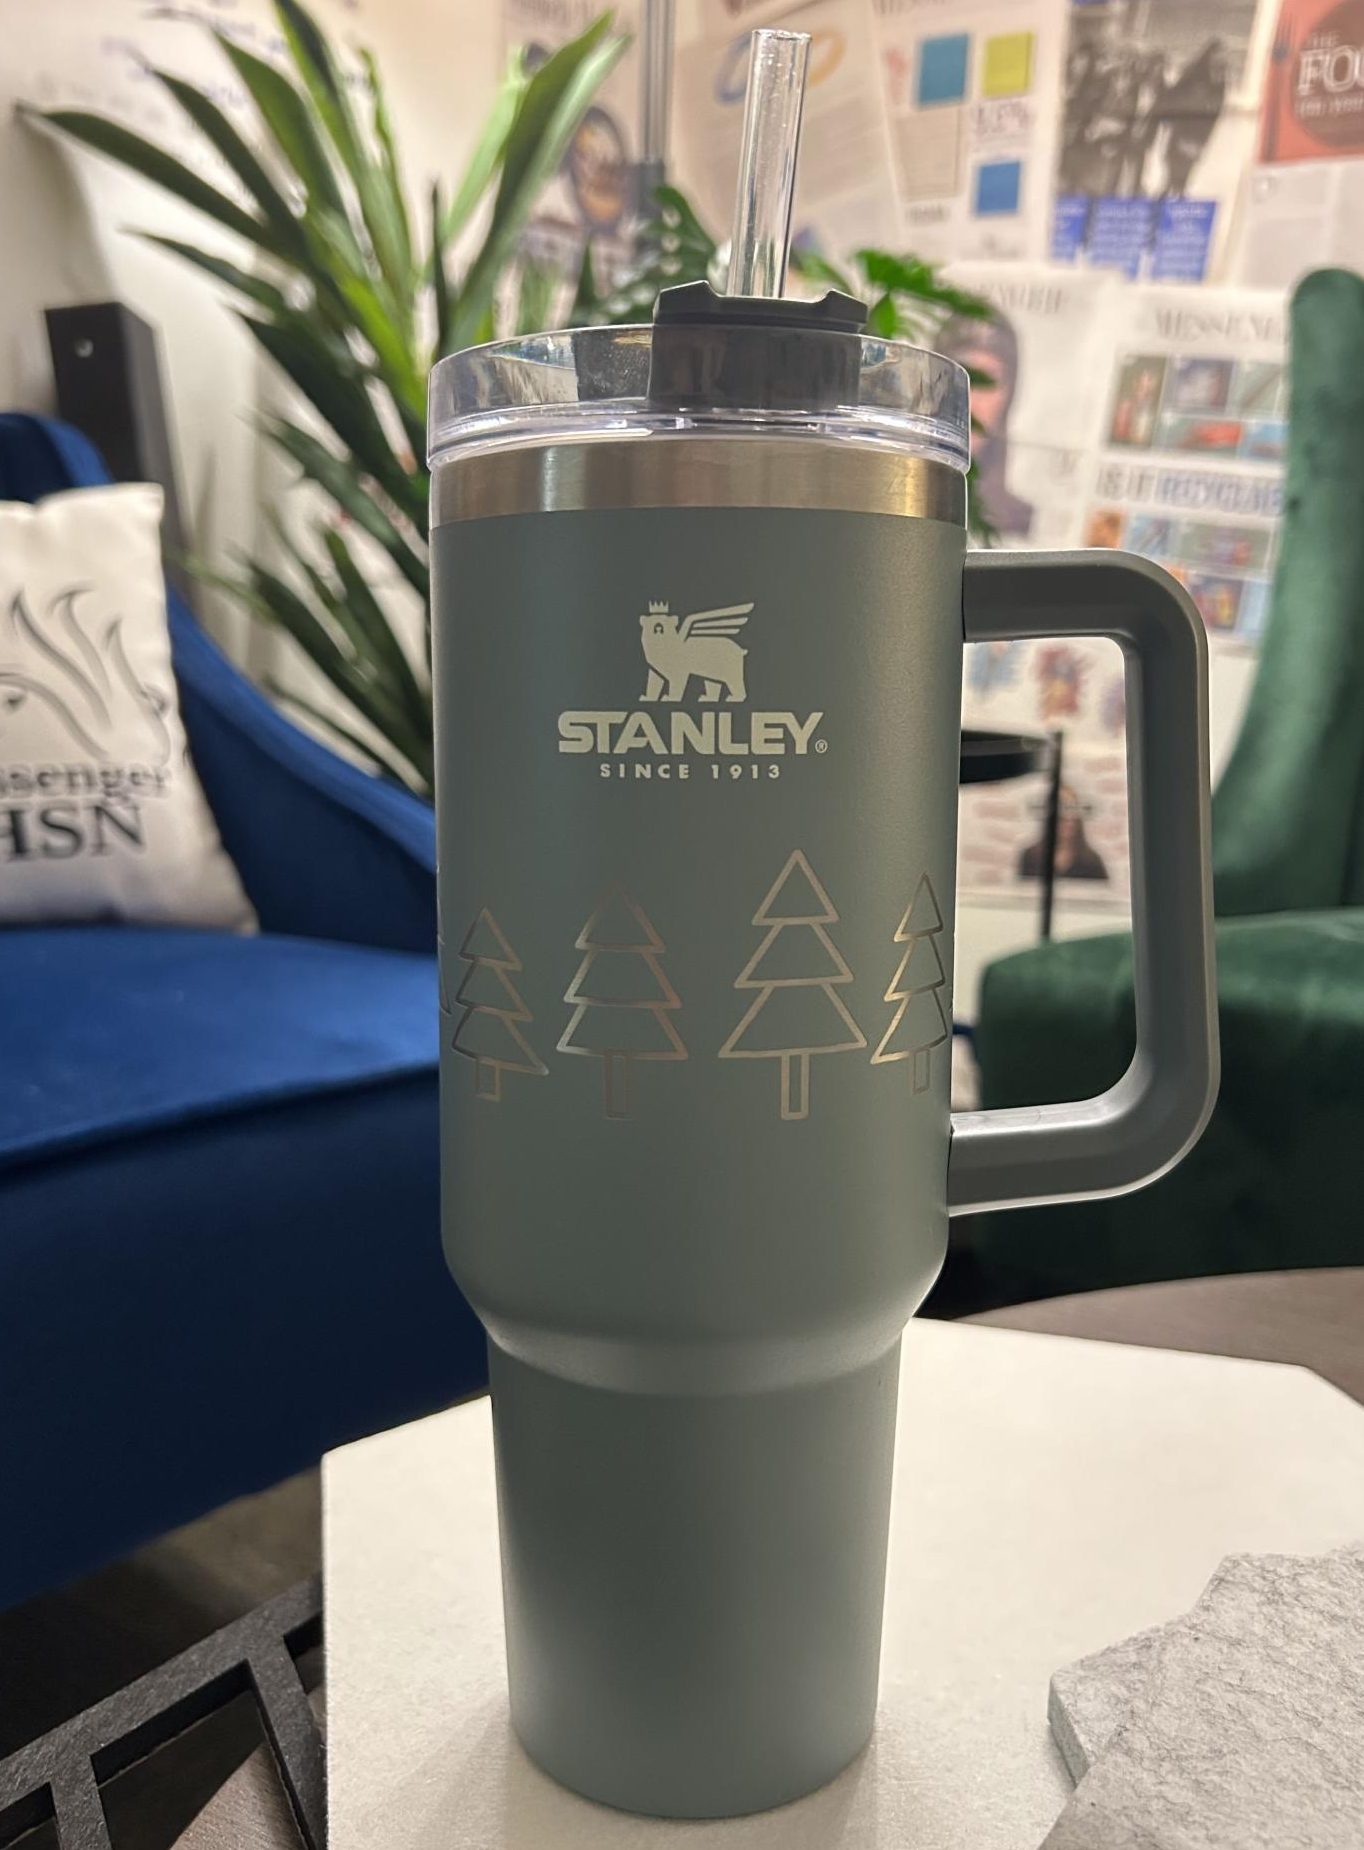 The Stanley is now engraved with the winter design.